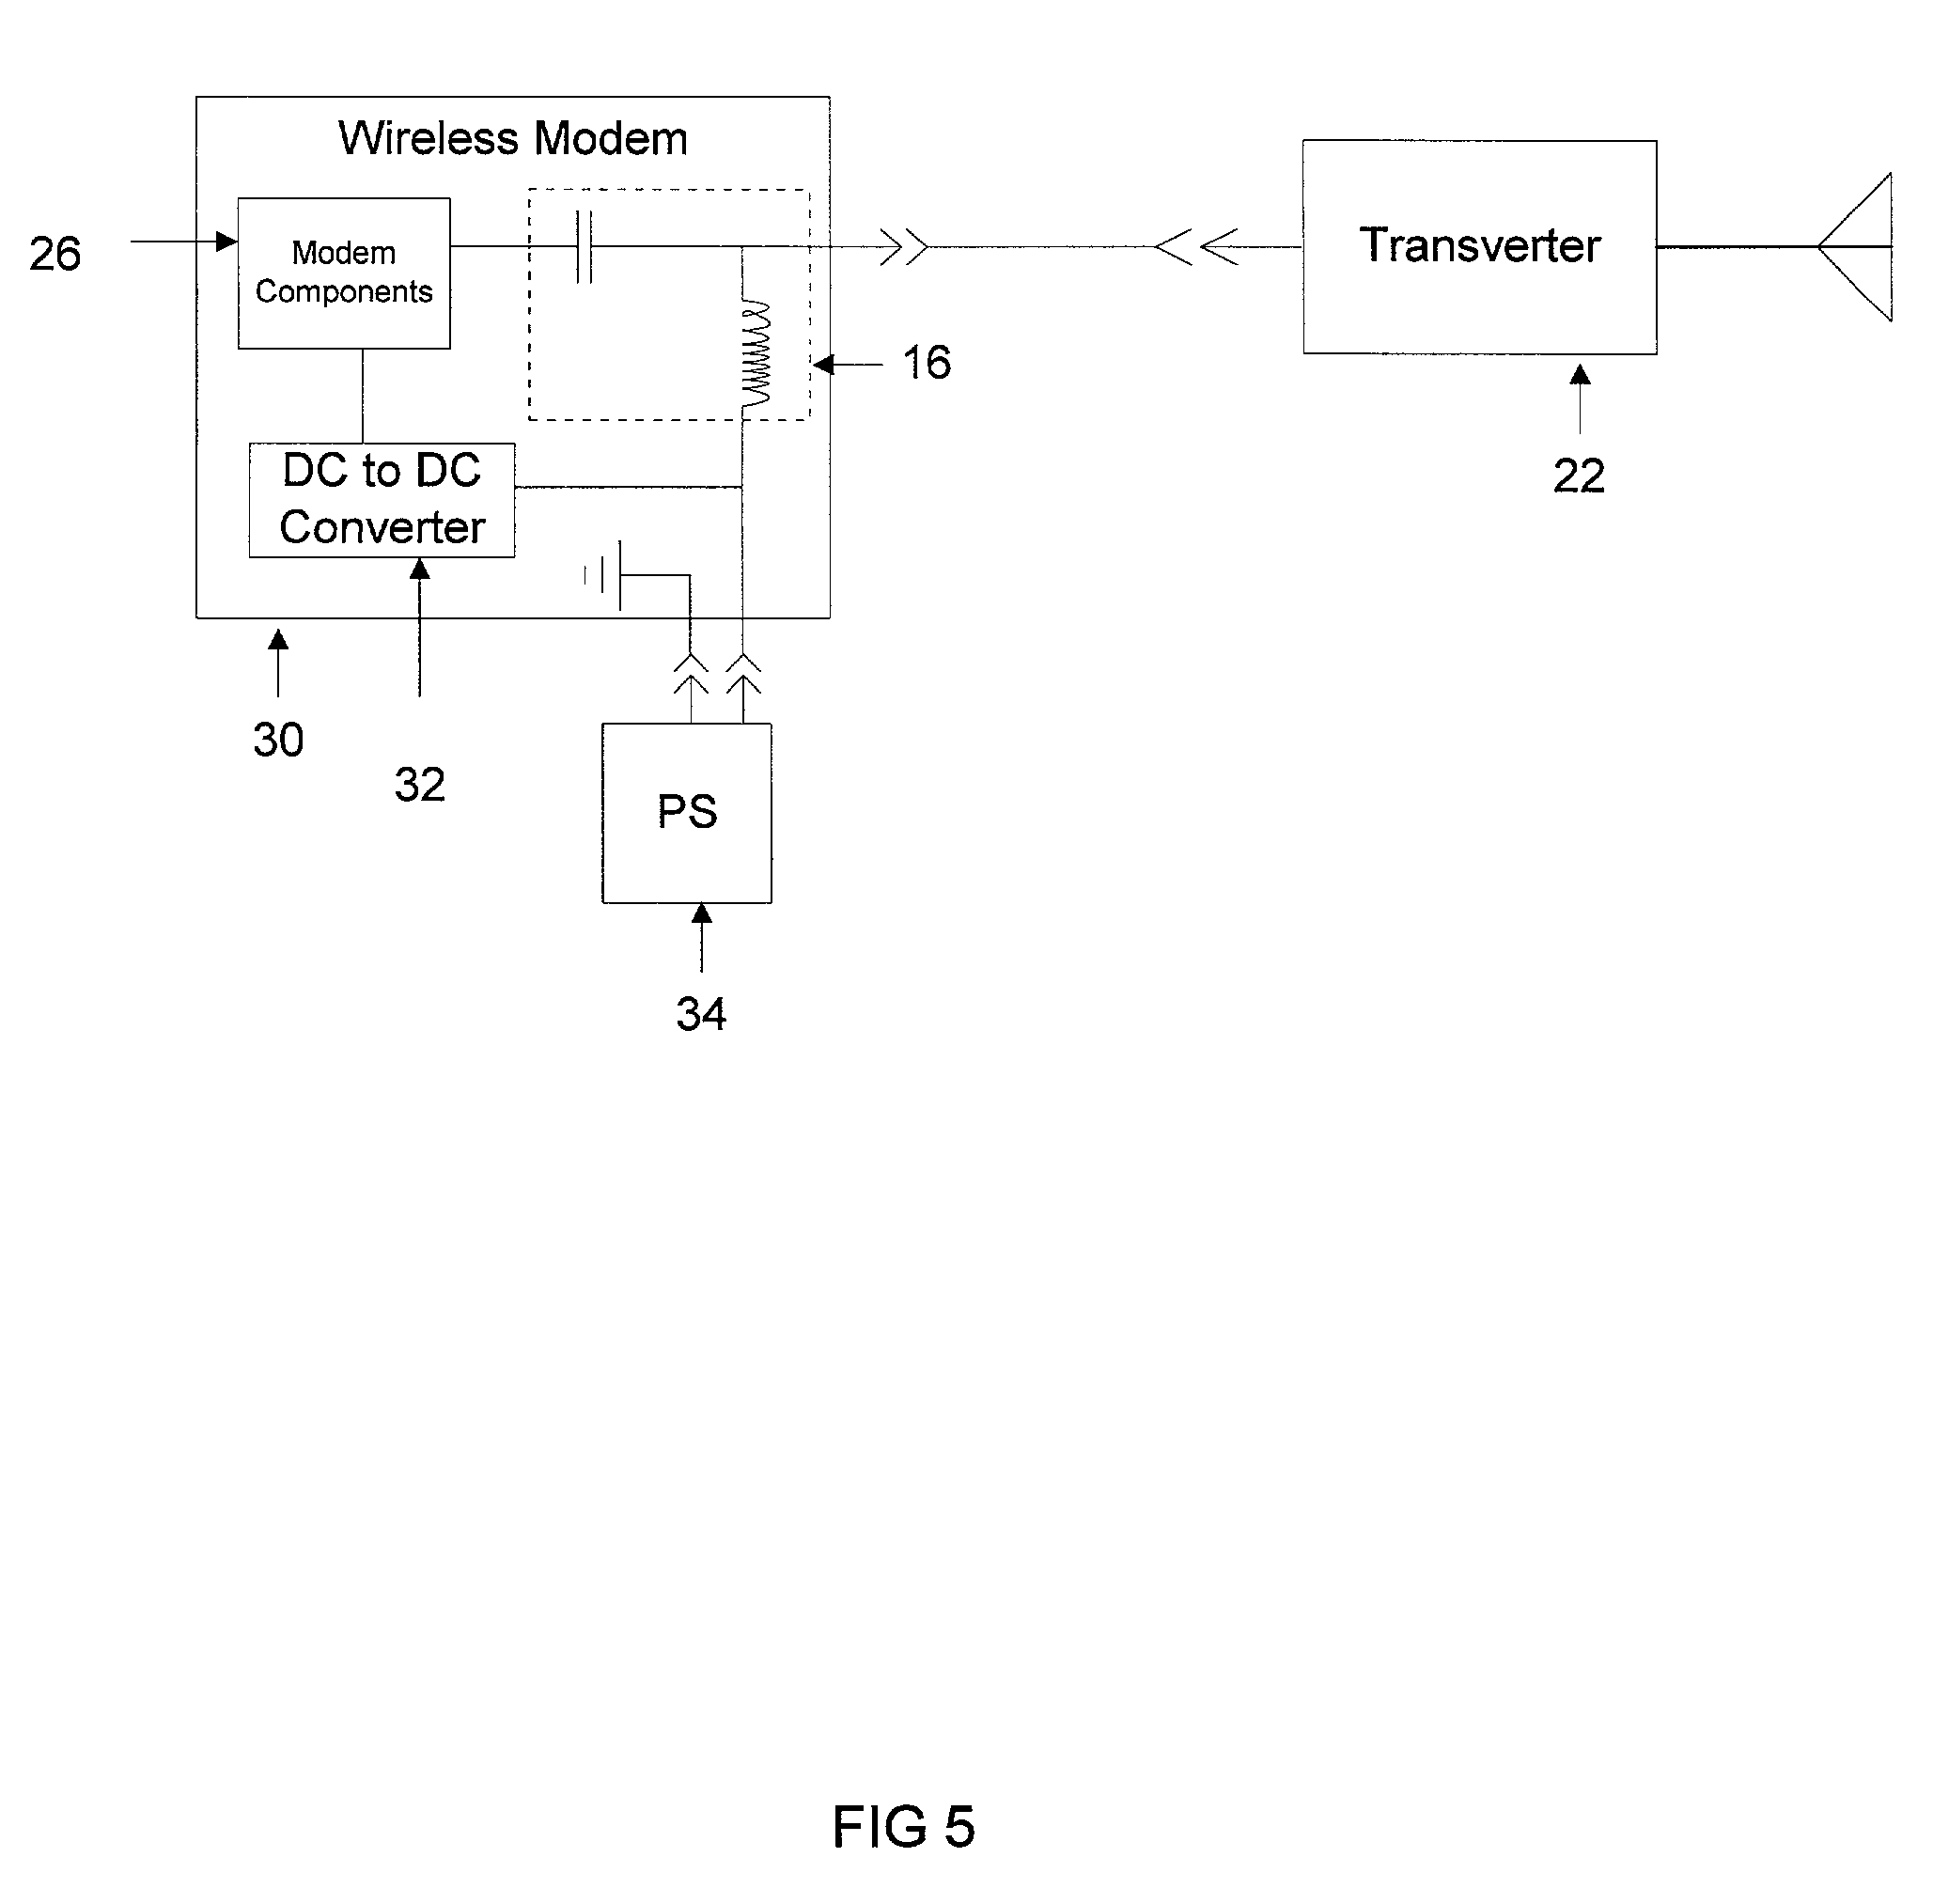 Power inserter configuration for wireless modems